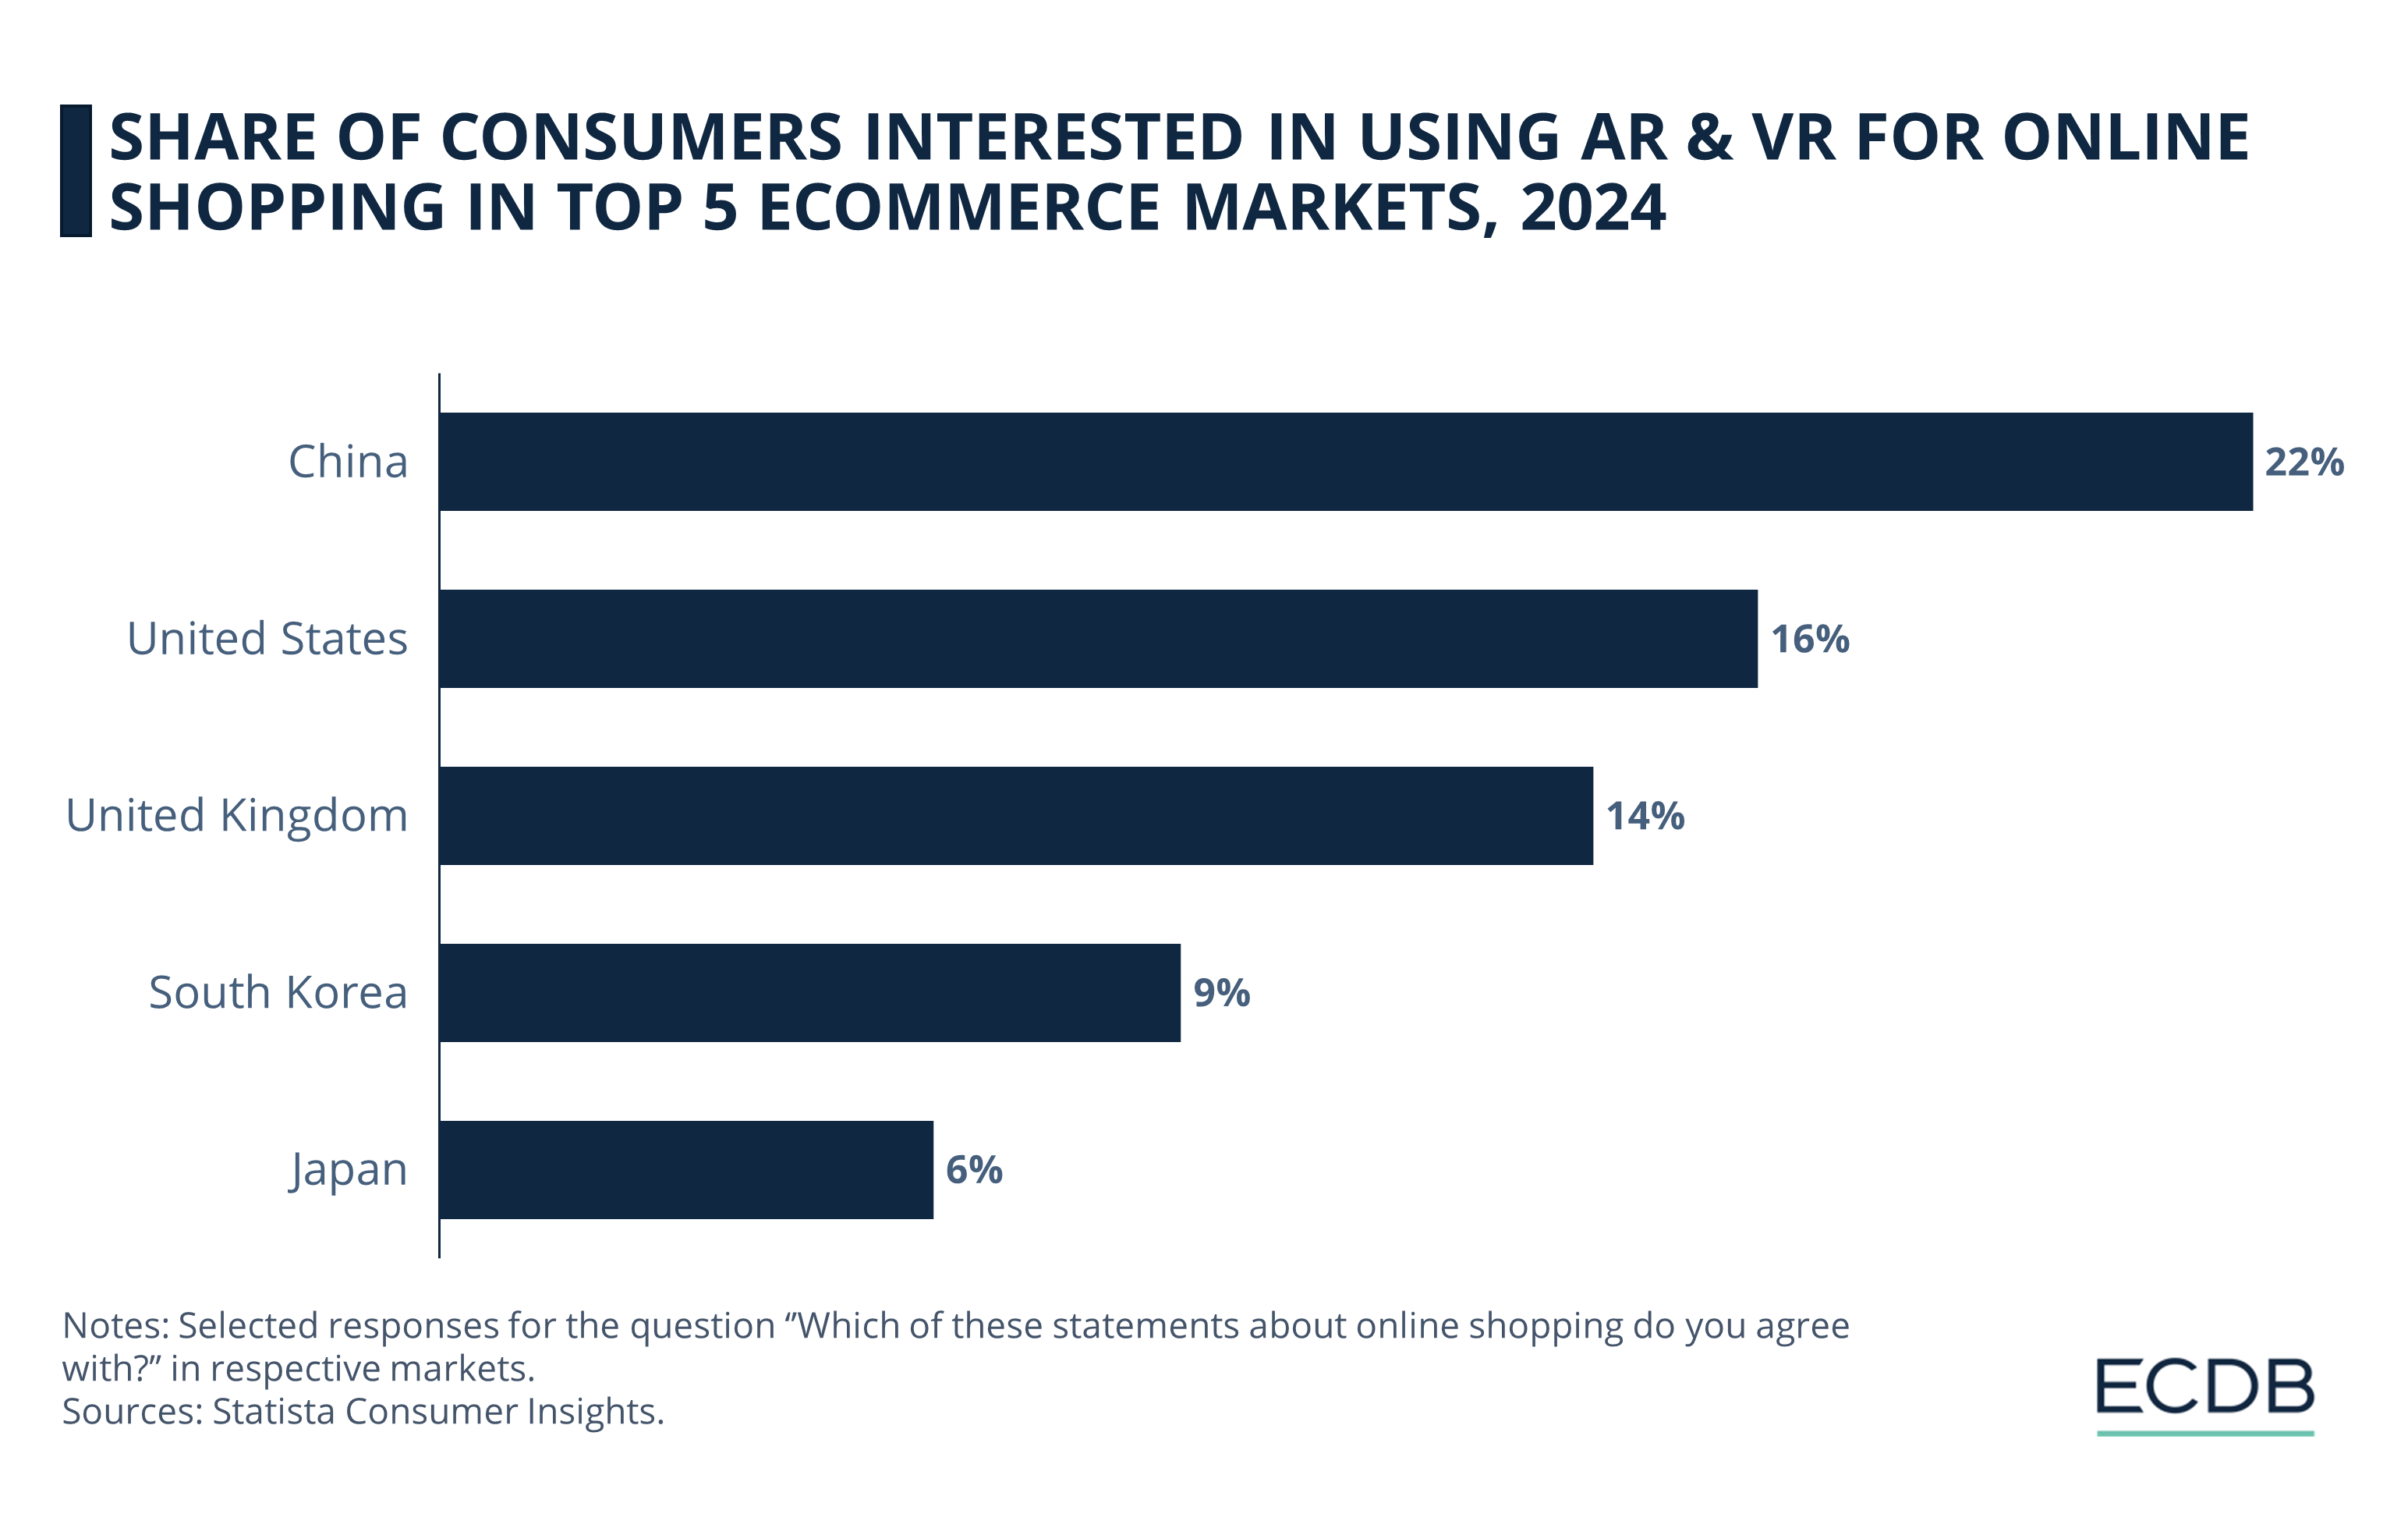 Share of Consumers Interested in Using AR & VR for Online Shopping in Top 5 eCommerce Markets, 2024